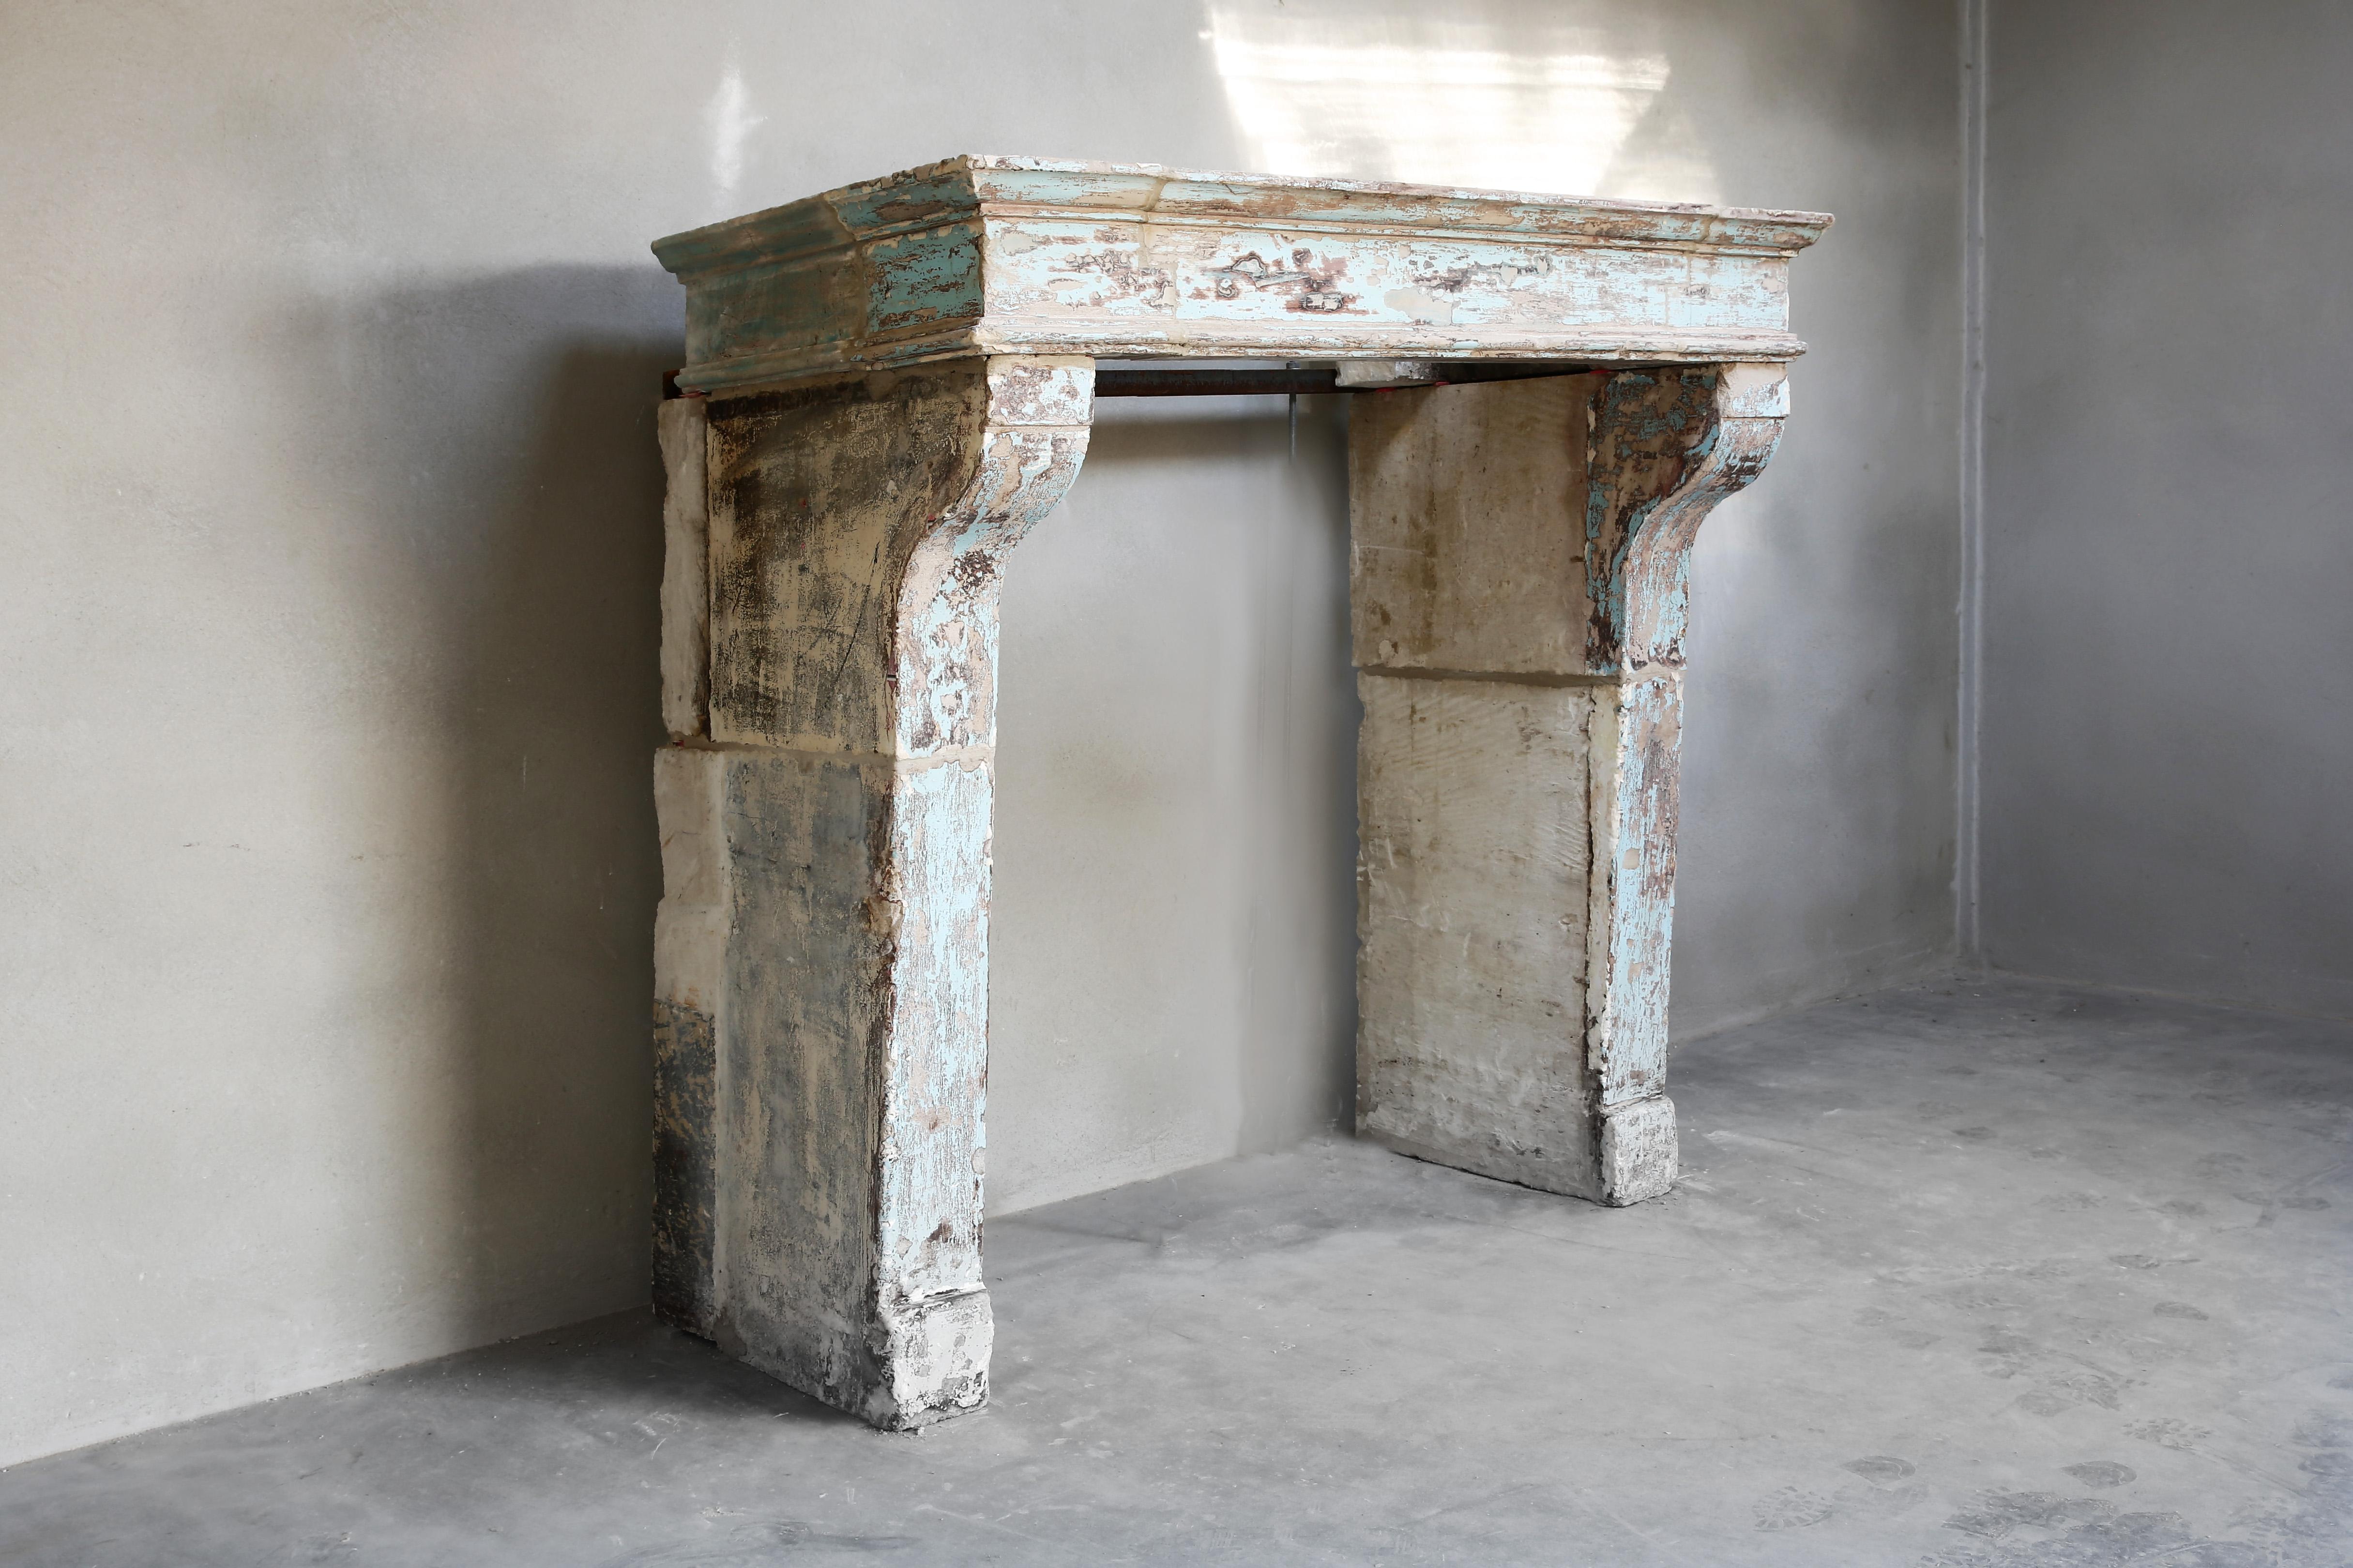 Beautiful patinated antique mantel fireplace of French limestone. The mantelpiece dates from the 19th century and is in the style of Campagnarde! A simple and sober appearance that fits within many interiors. The old blue paint or patina makes this